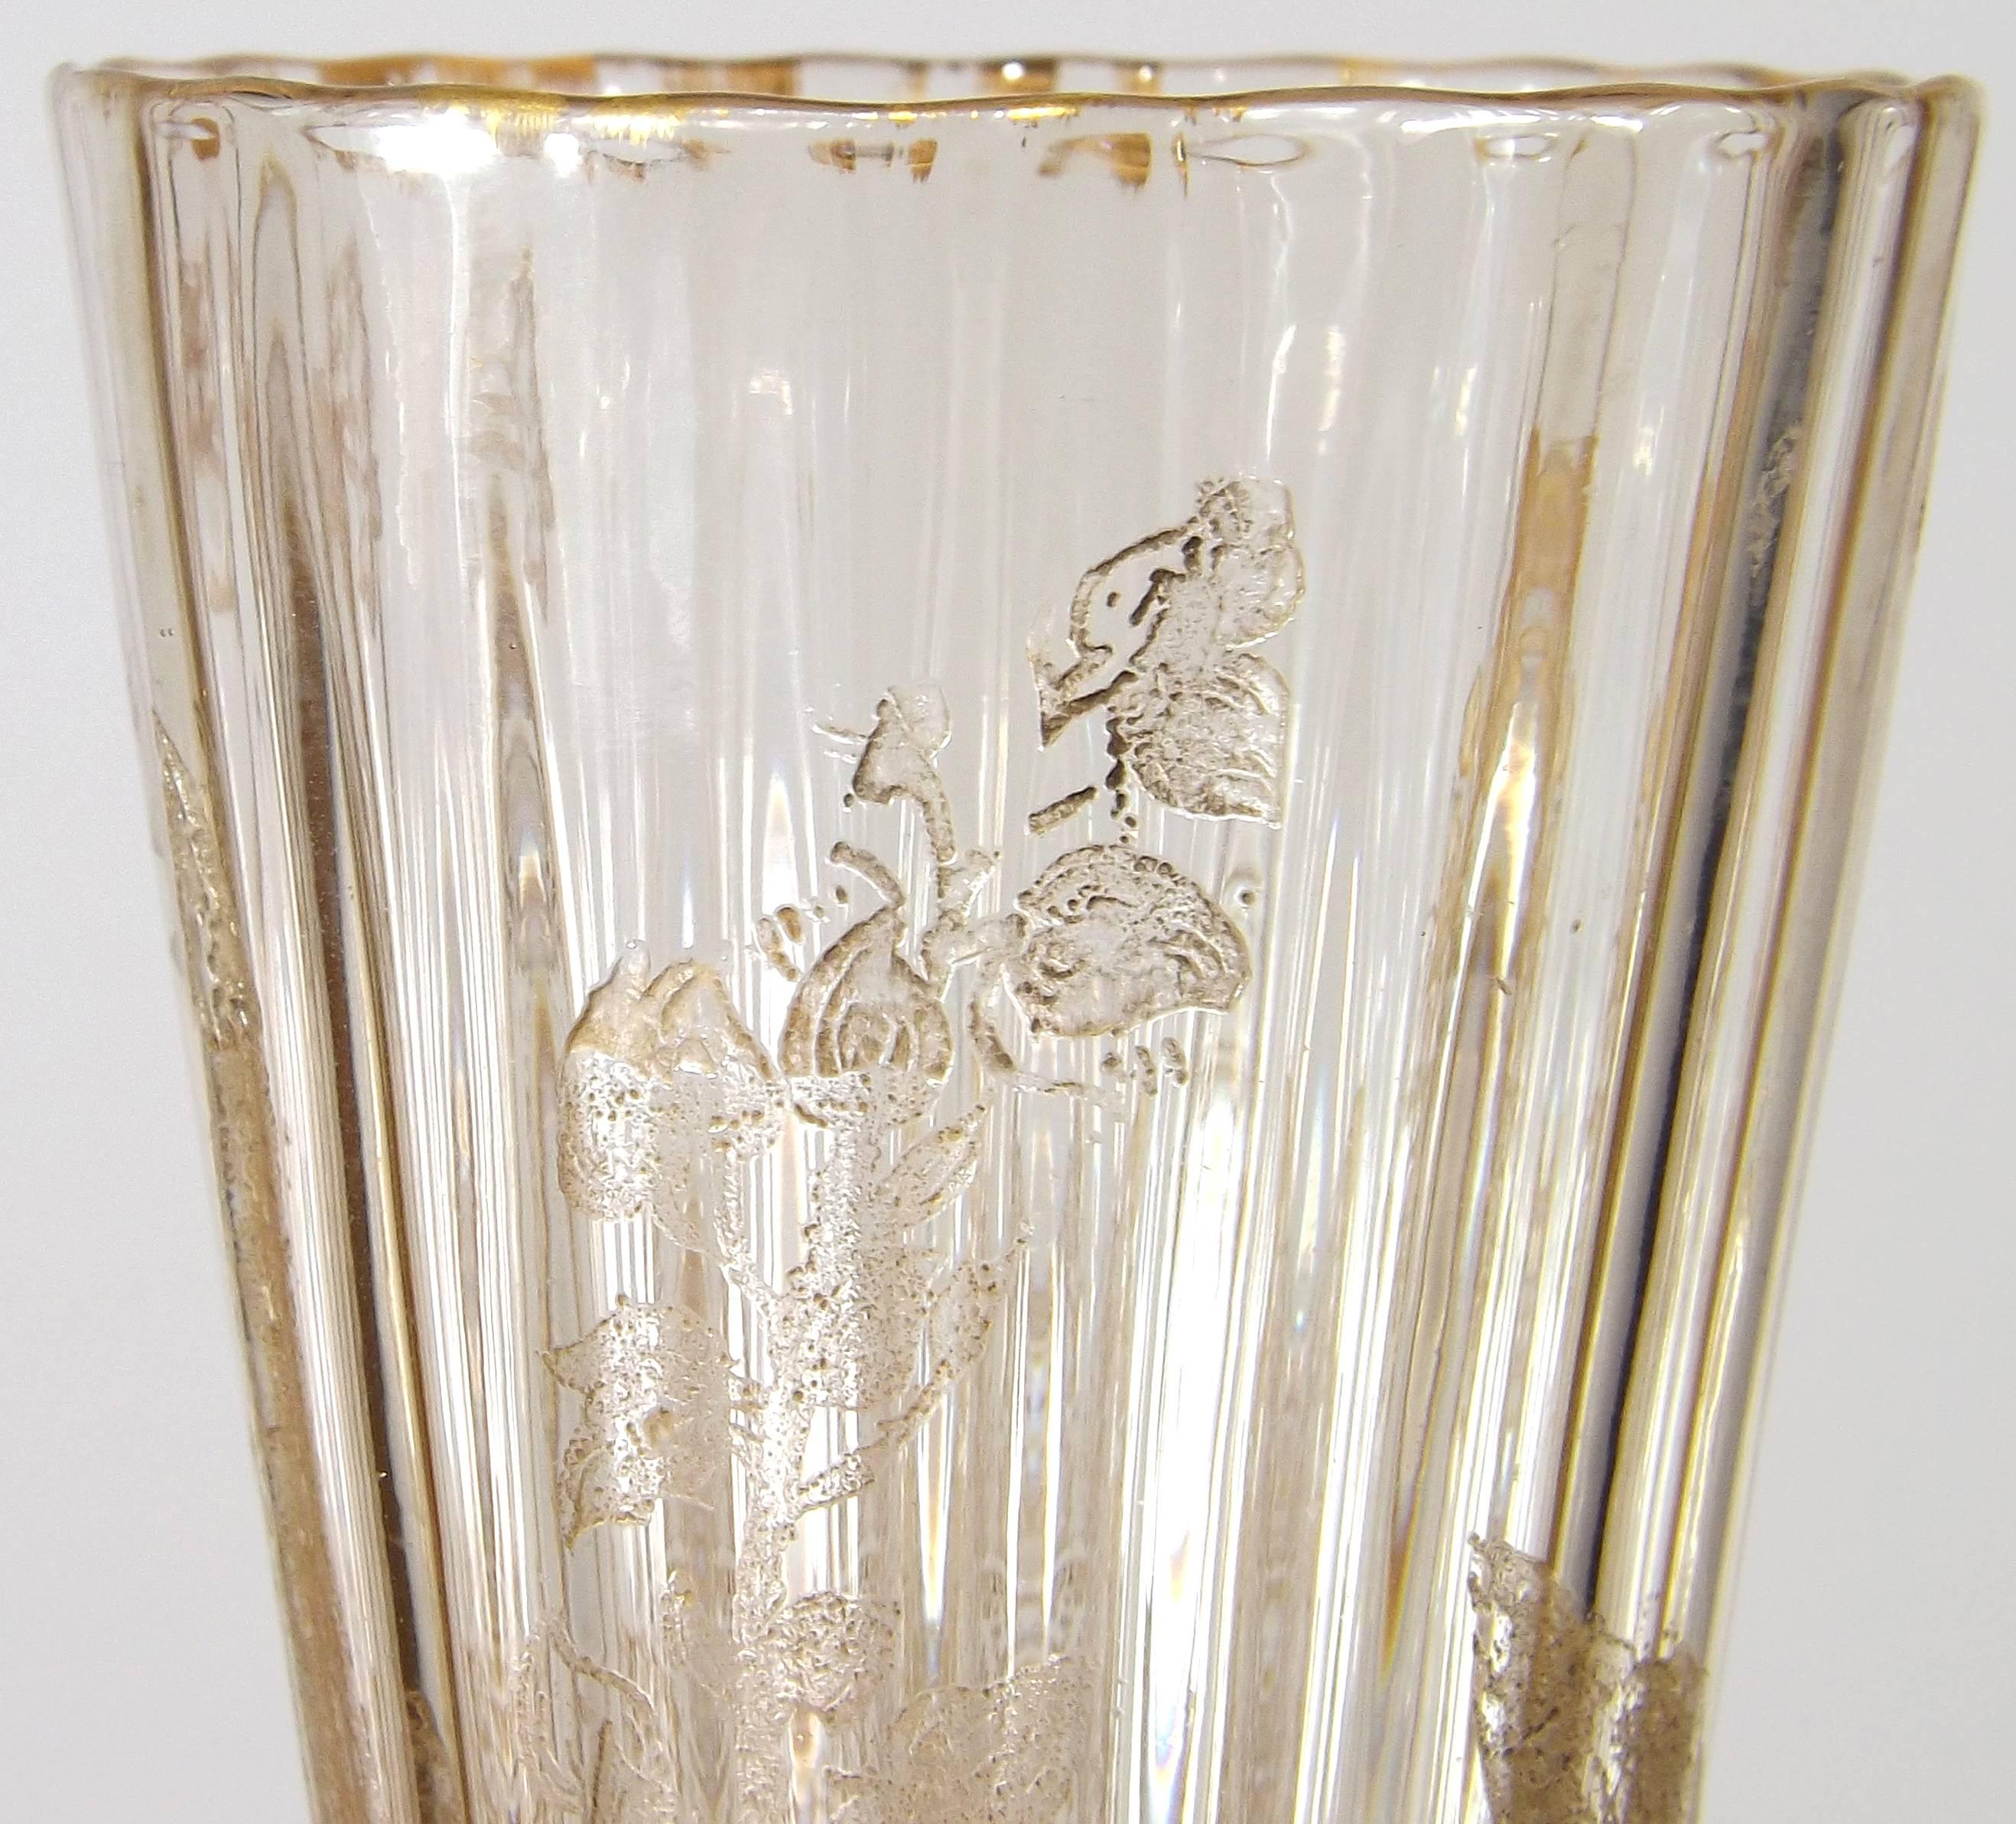 A magnificent Emile Gallé vase with intaglio etched design form circa 1880. Signed on bottom 'Cristallerie d'E. Gallé Nancy/ modele et decor dépose fect'. In perfect condition, 4 1/8 inches tall.